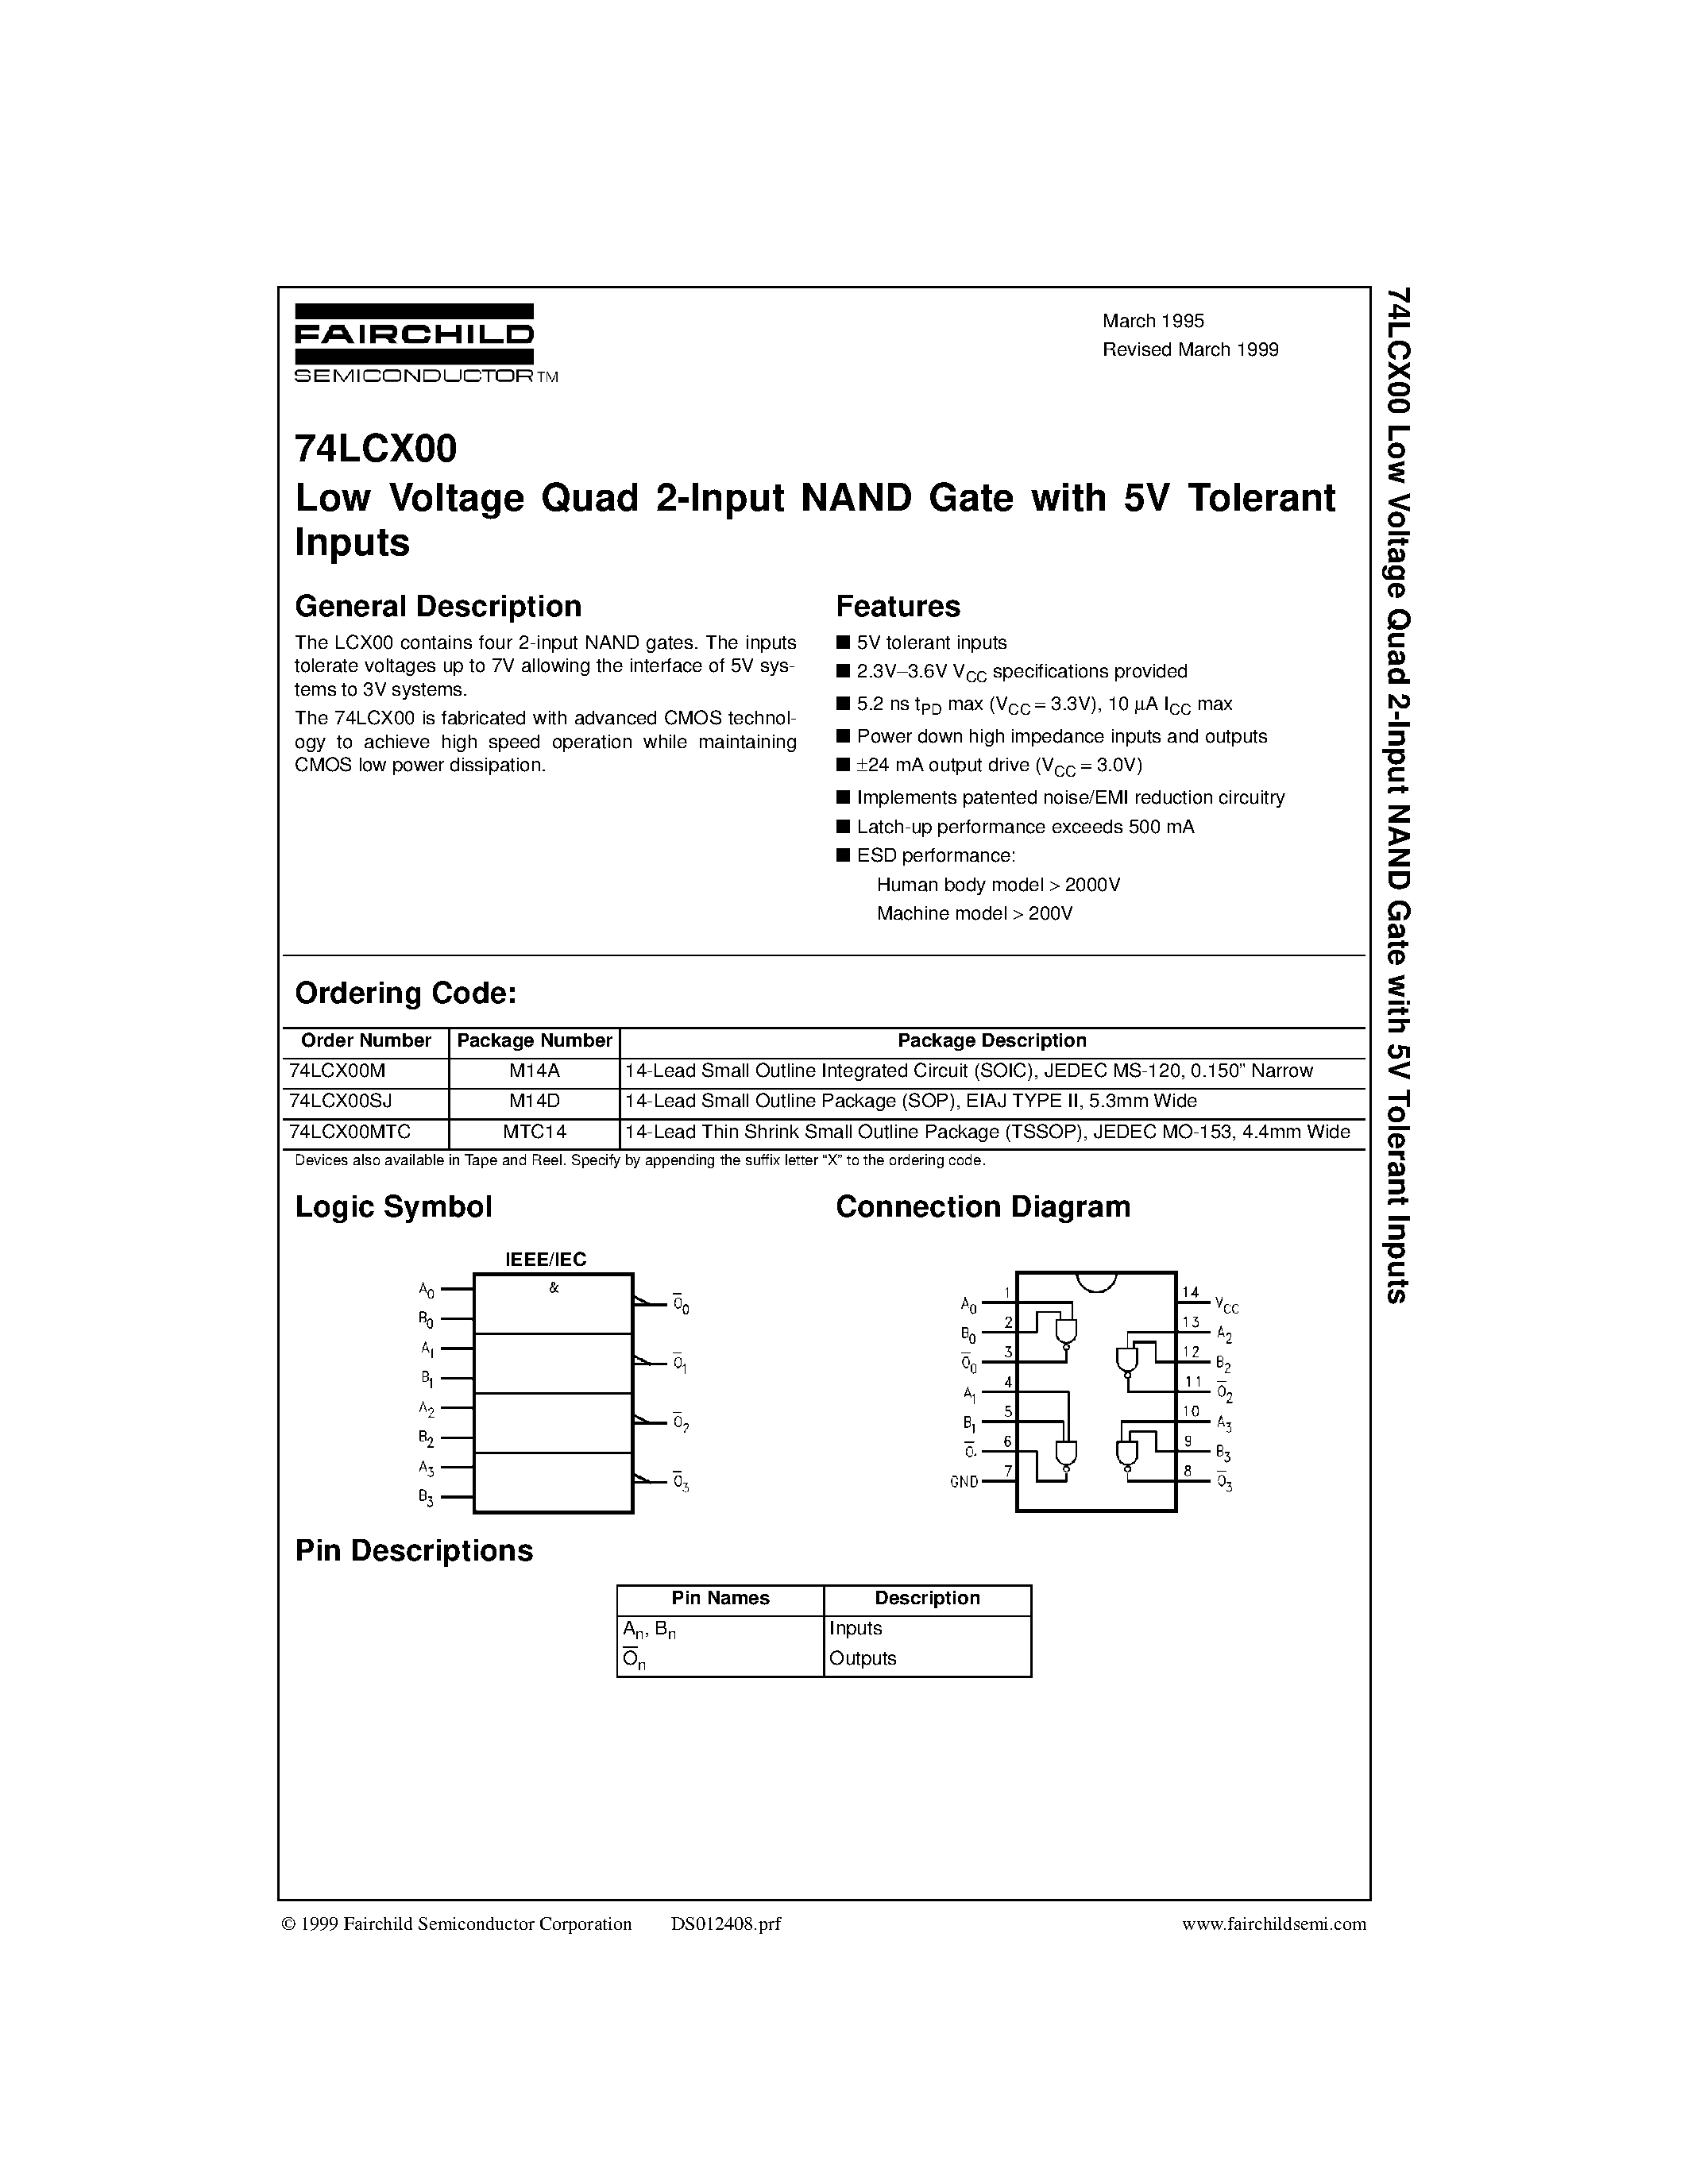 Datasheet 74LCX00SJ - Low Voltage Quad 2-Input NAND Gate with 5V Tolerant Inputs page 1